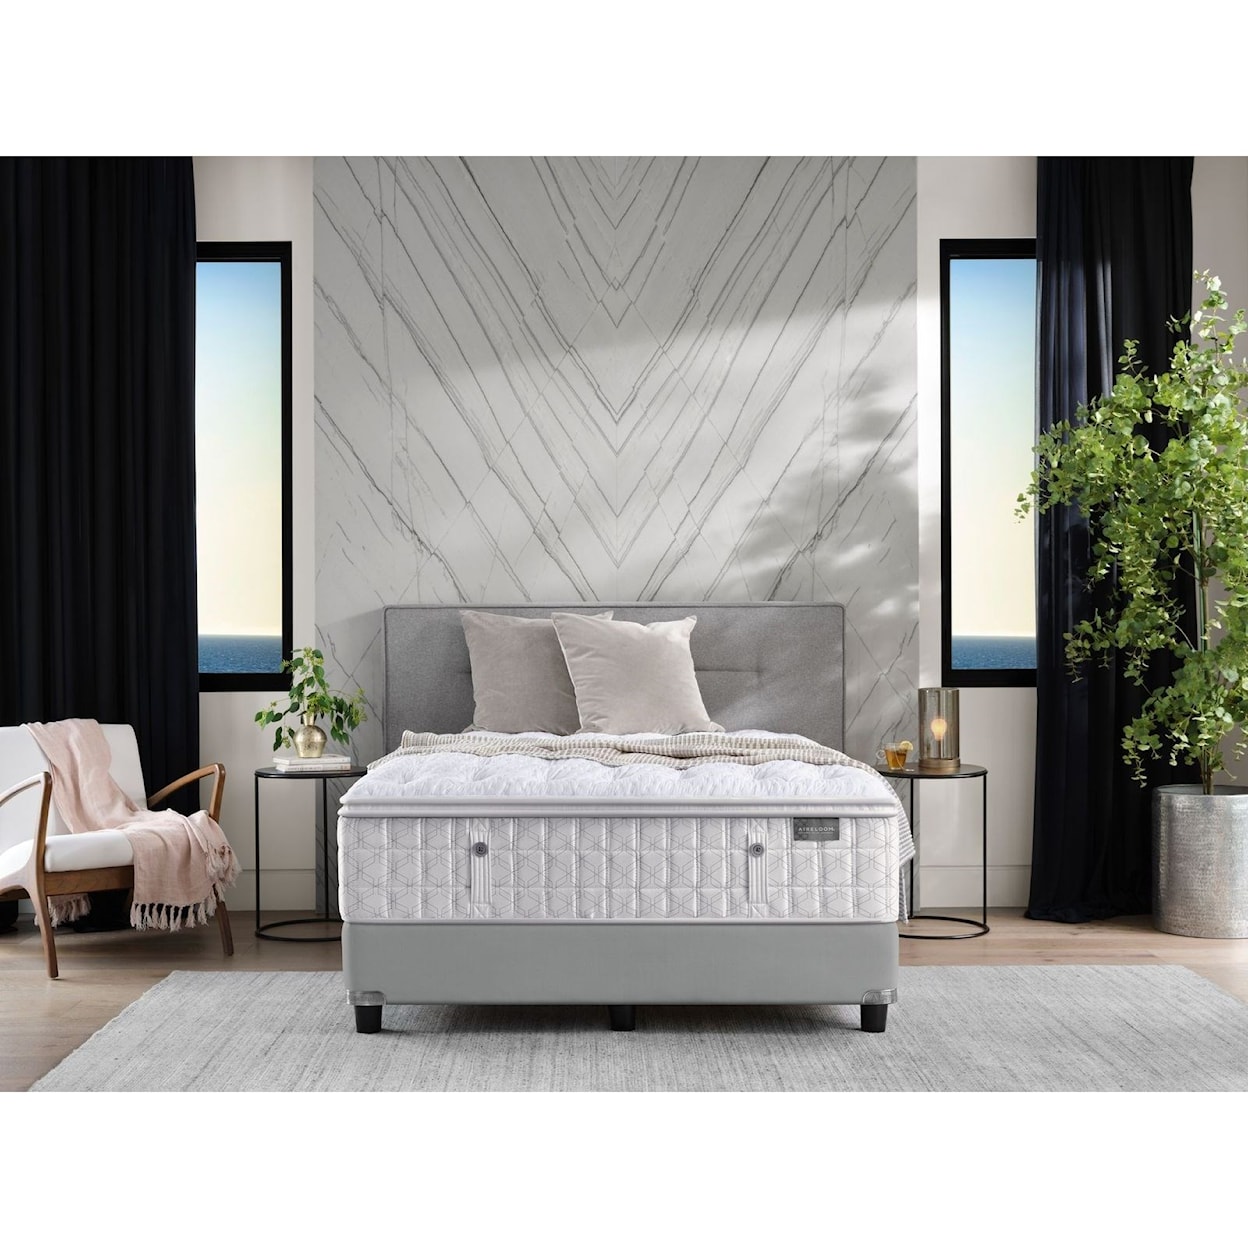 Aireloom Bedding Timeless Odyssey Luxetop Firm M2 Twin Luxury Firm Mattress